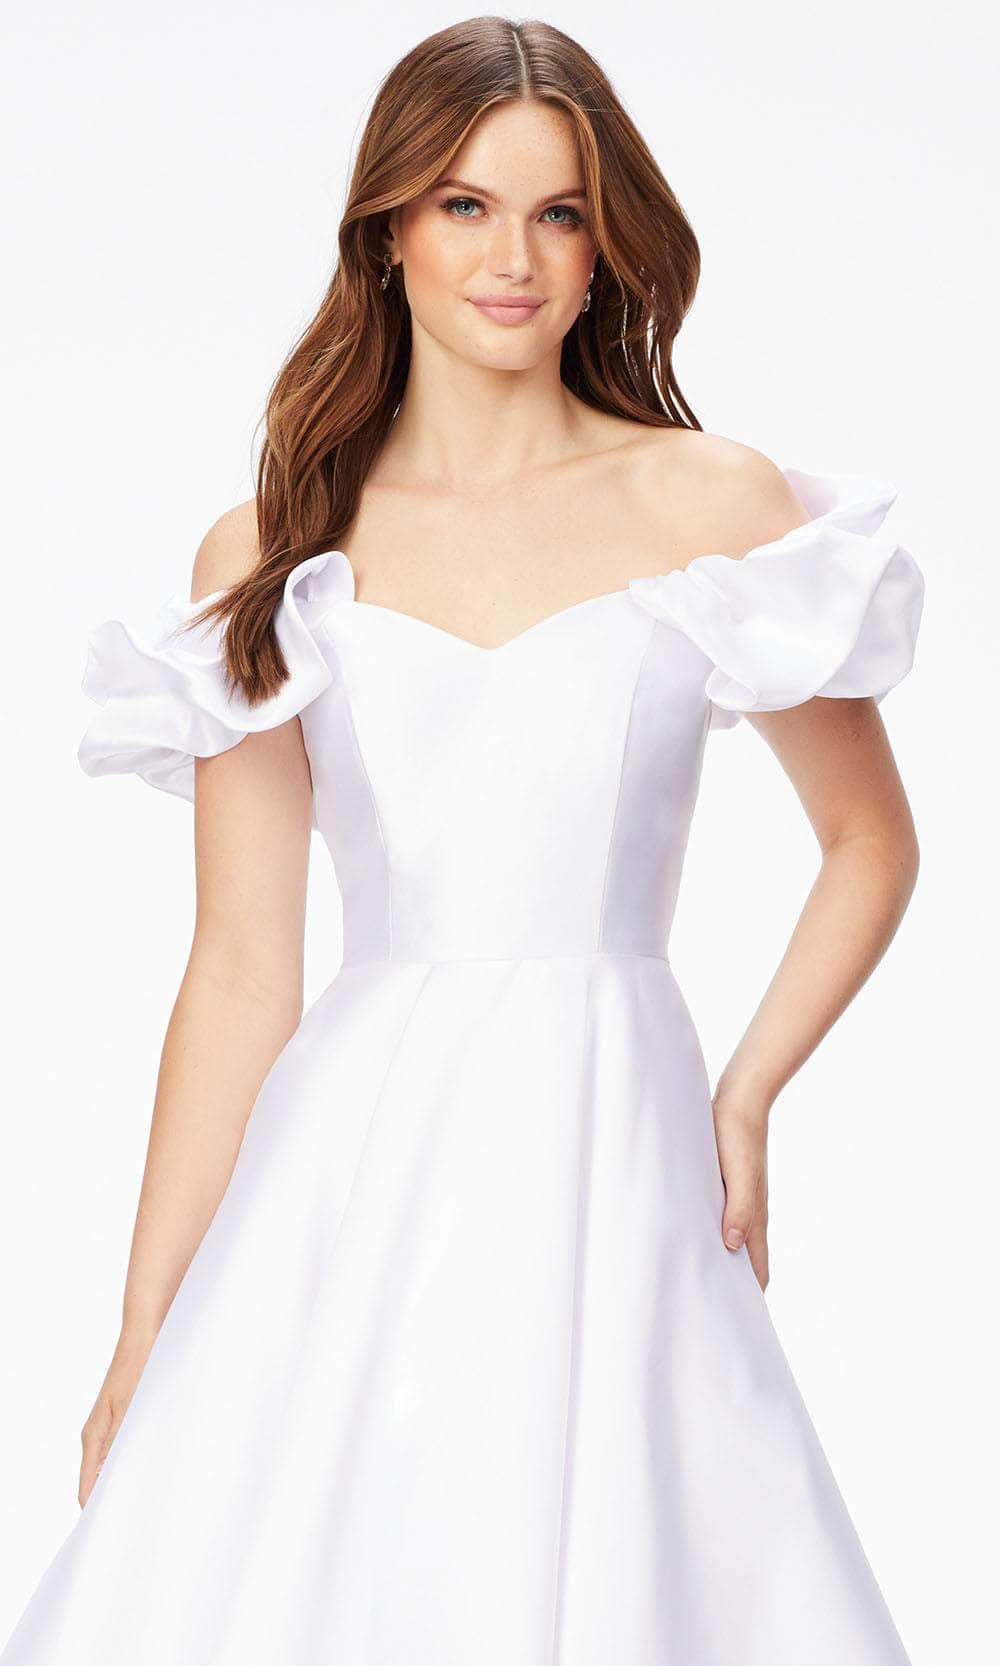 Ashley Lauren 11231 - Ruffled Off-Shoulder Bridal Gown Special Occasion Dress